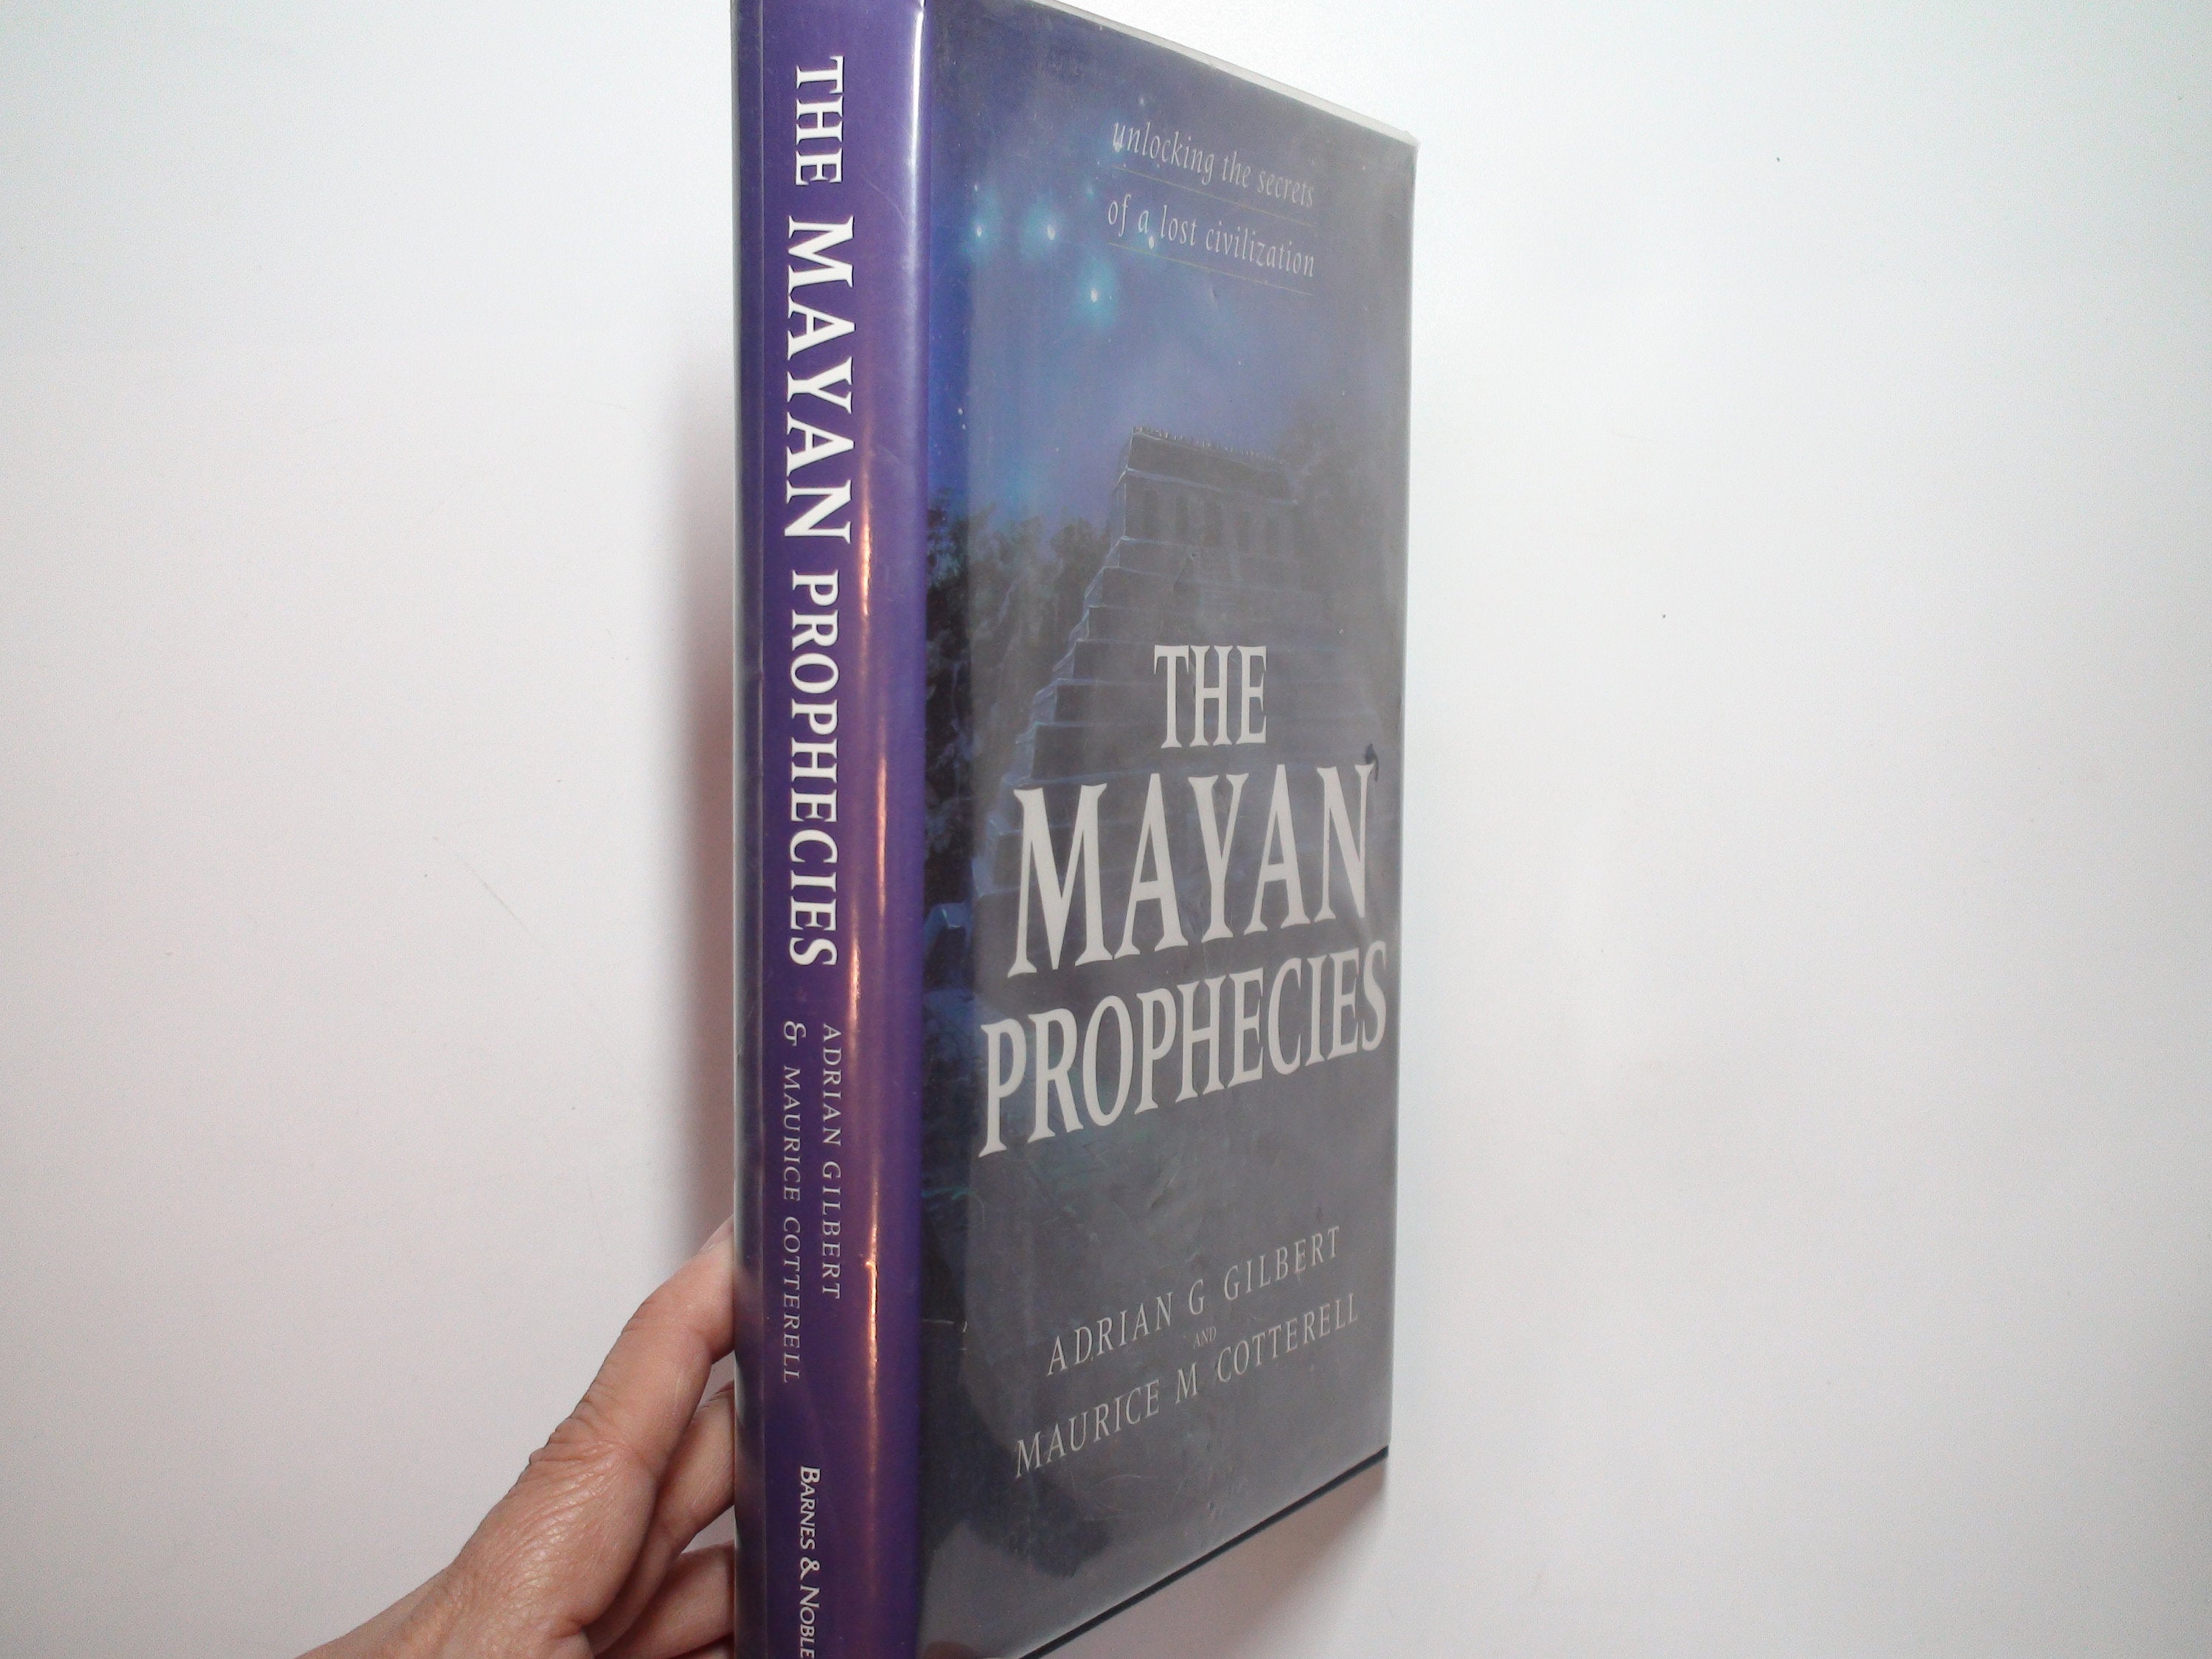 The Mayan Prophecies, Adrian G. Gilbert, Maurice M. Cotterell, Illustrated, 1996